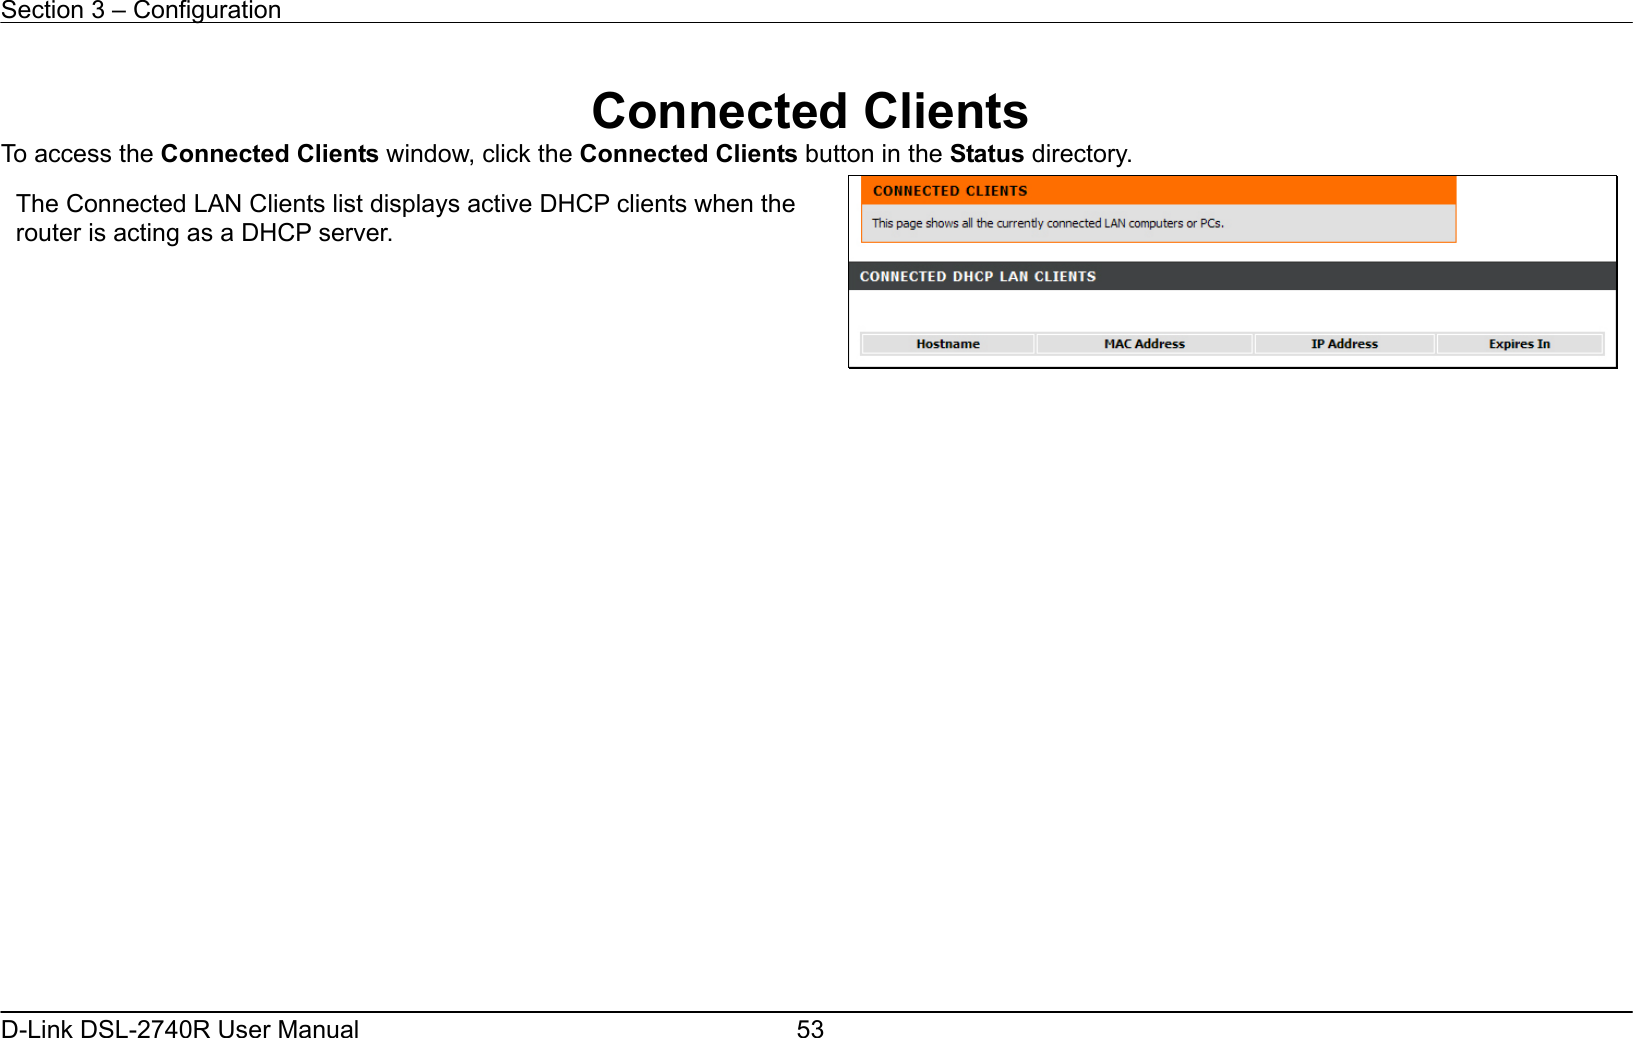 Section 3 – Configuration   D-Link DSL-2740R User Manual  53 Connected Clients To access the Connected Clients window, click the Connected Clients button in the Status directory.                        The Connected LAN Clients list displays active DHCP clients when the router is acting as a DHCP server. 